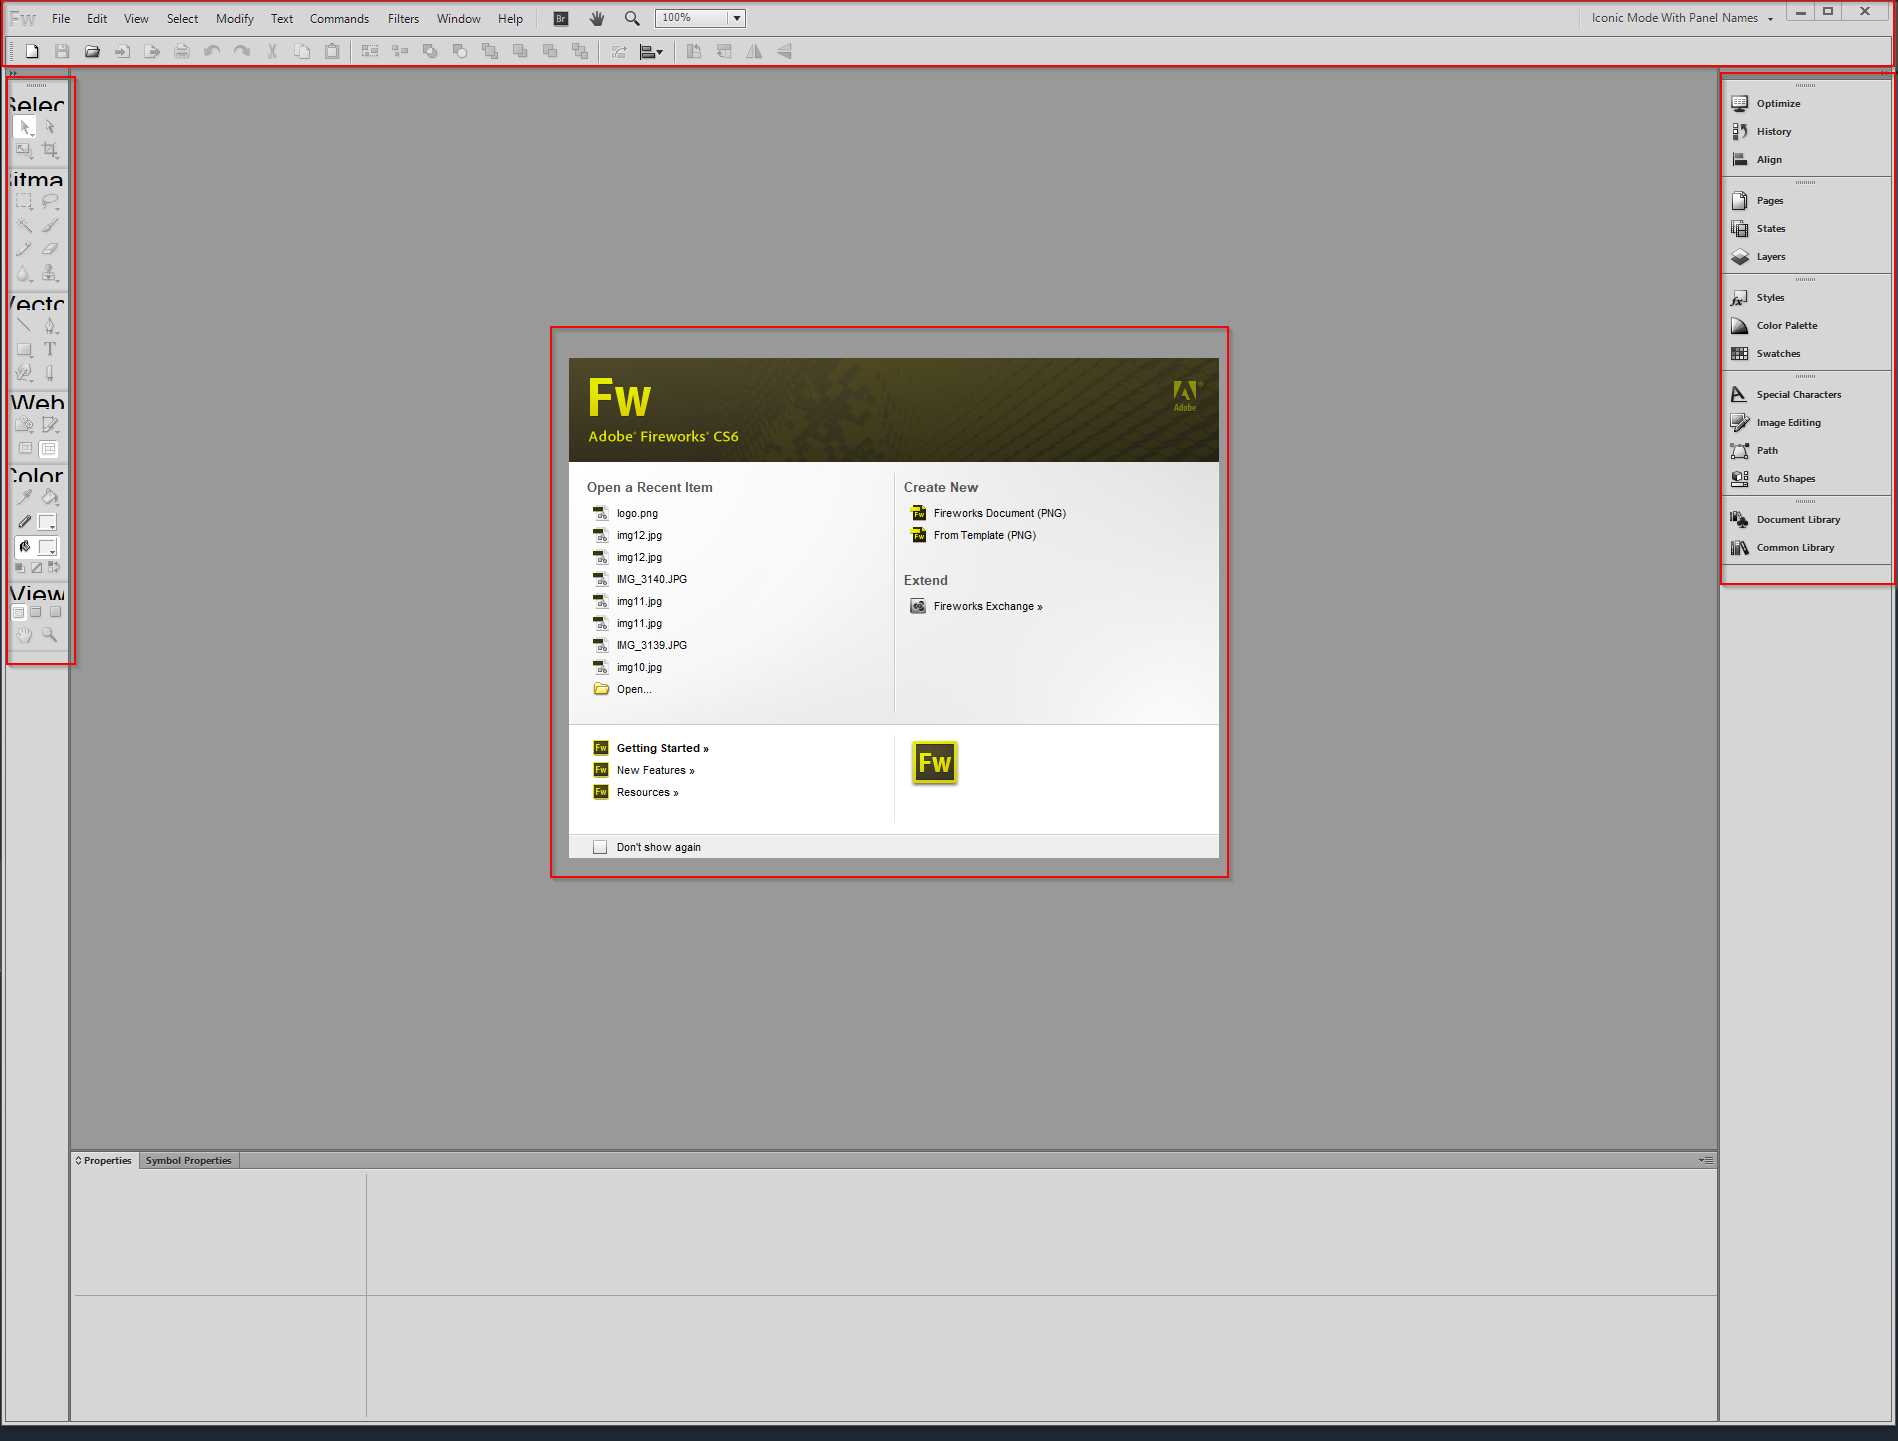 what is adobe fireworks cs6 used for